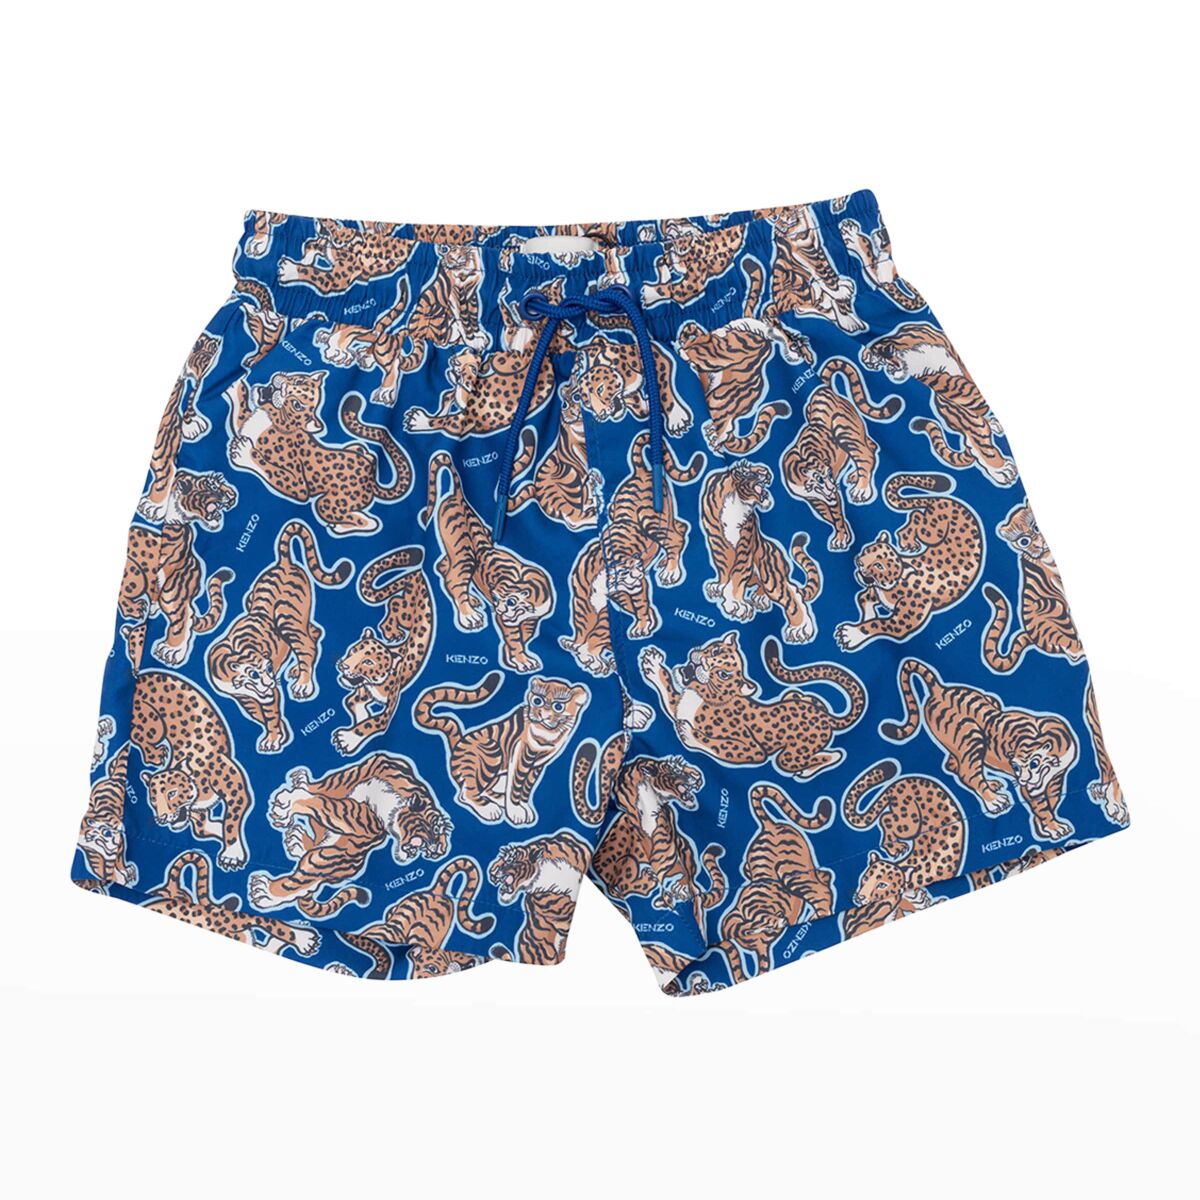 A pair of blue swim trunks with an allover tiger print